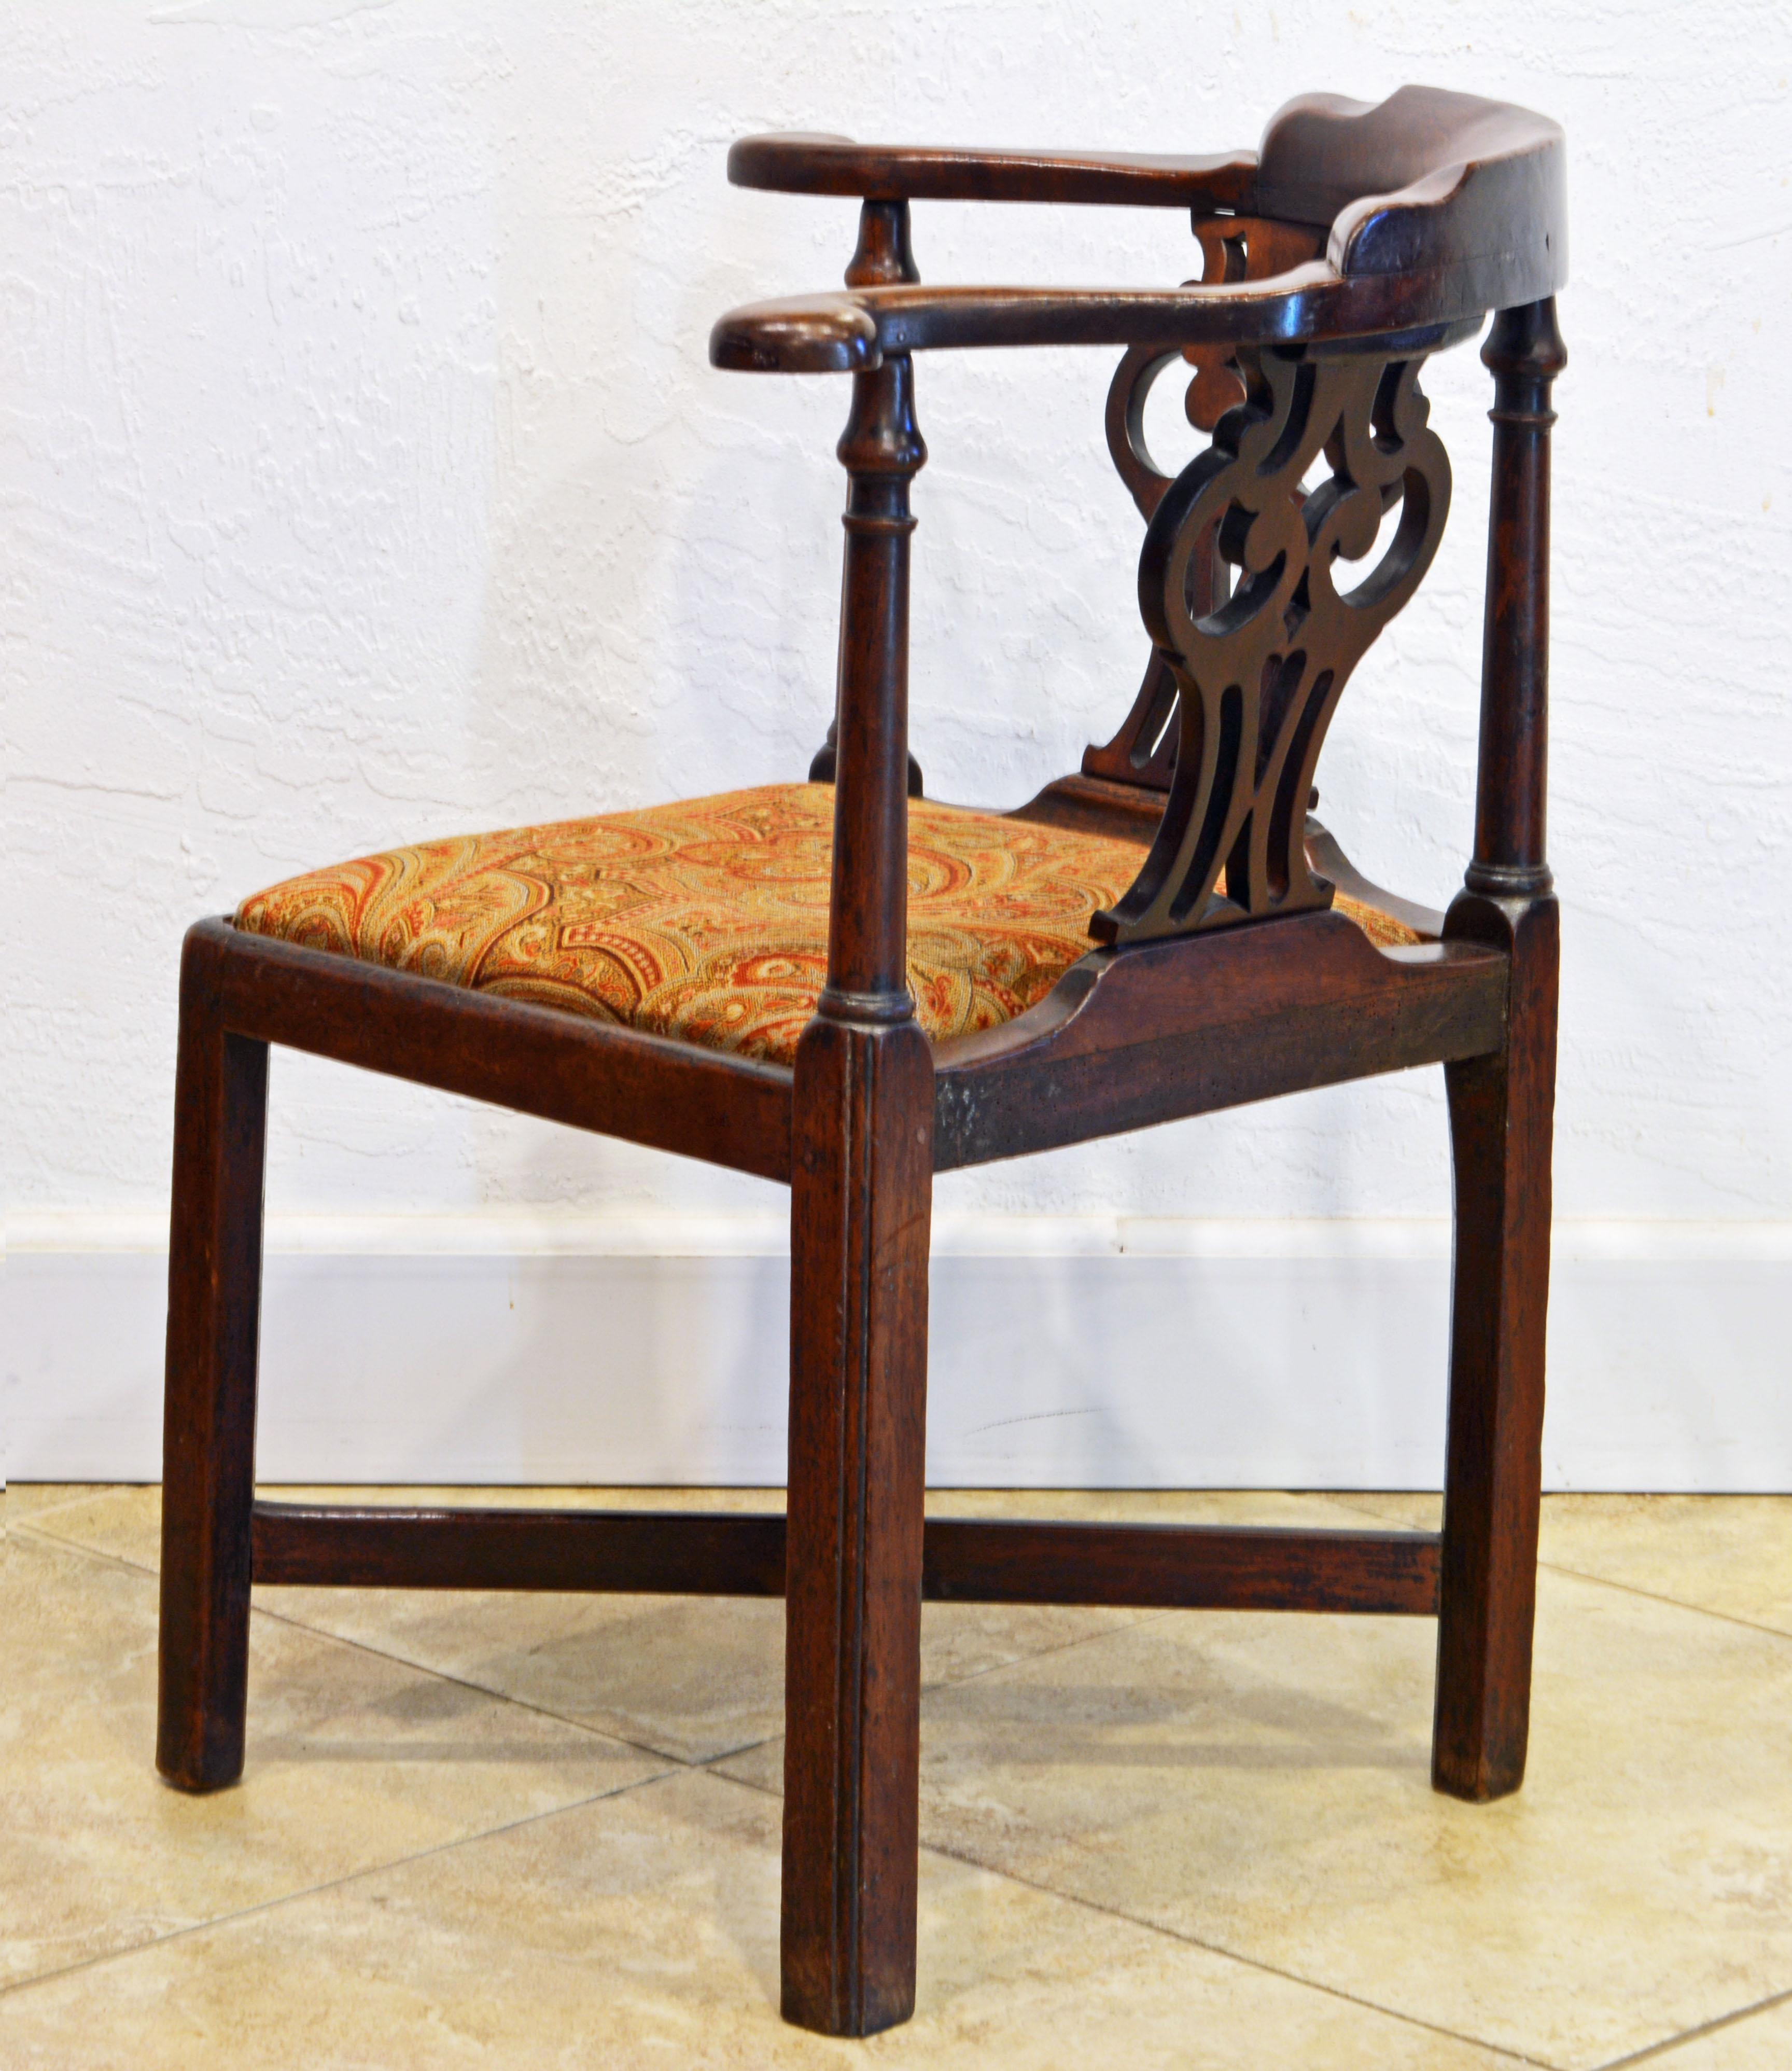 Hand-Carved English George III Chippendale Carved Mahogany Corner Chair, Late 18th Century